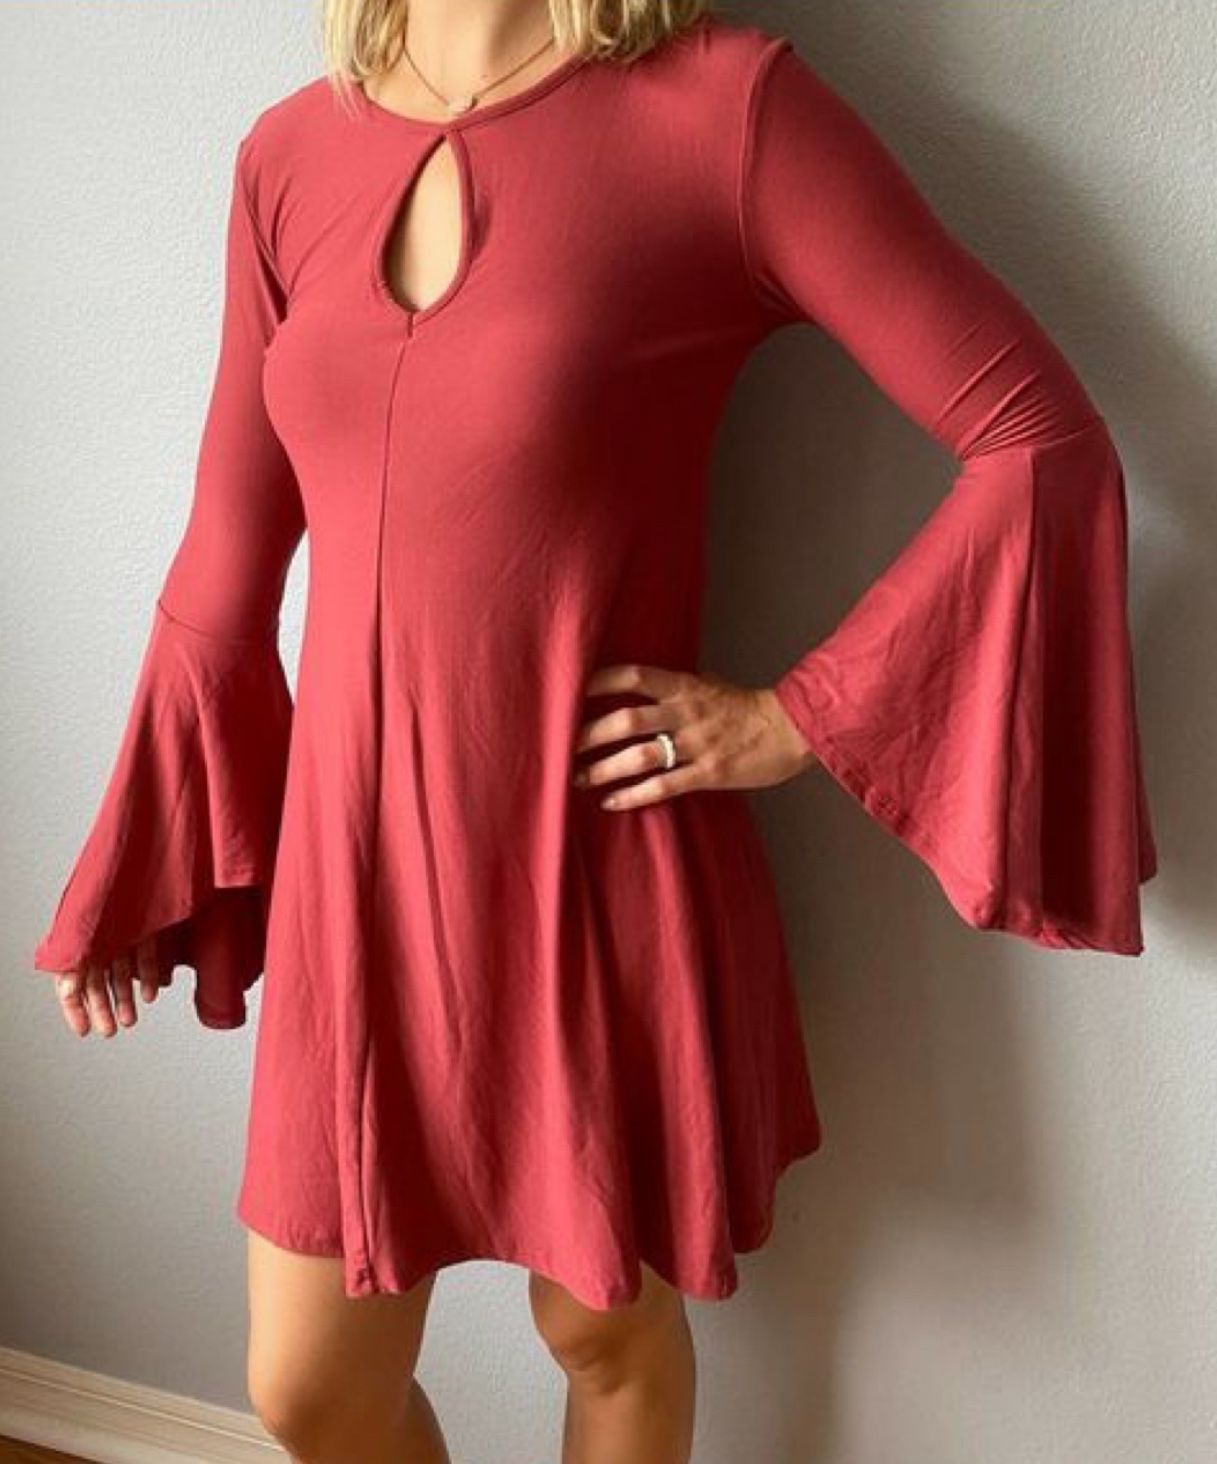 Planet Gold keyhole bell sleeves casual stretchy dress size M summer cocktails